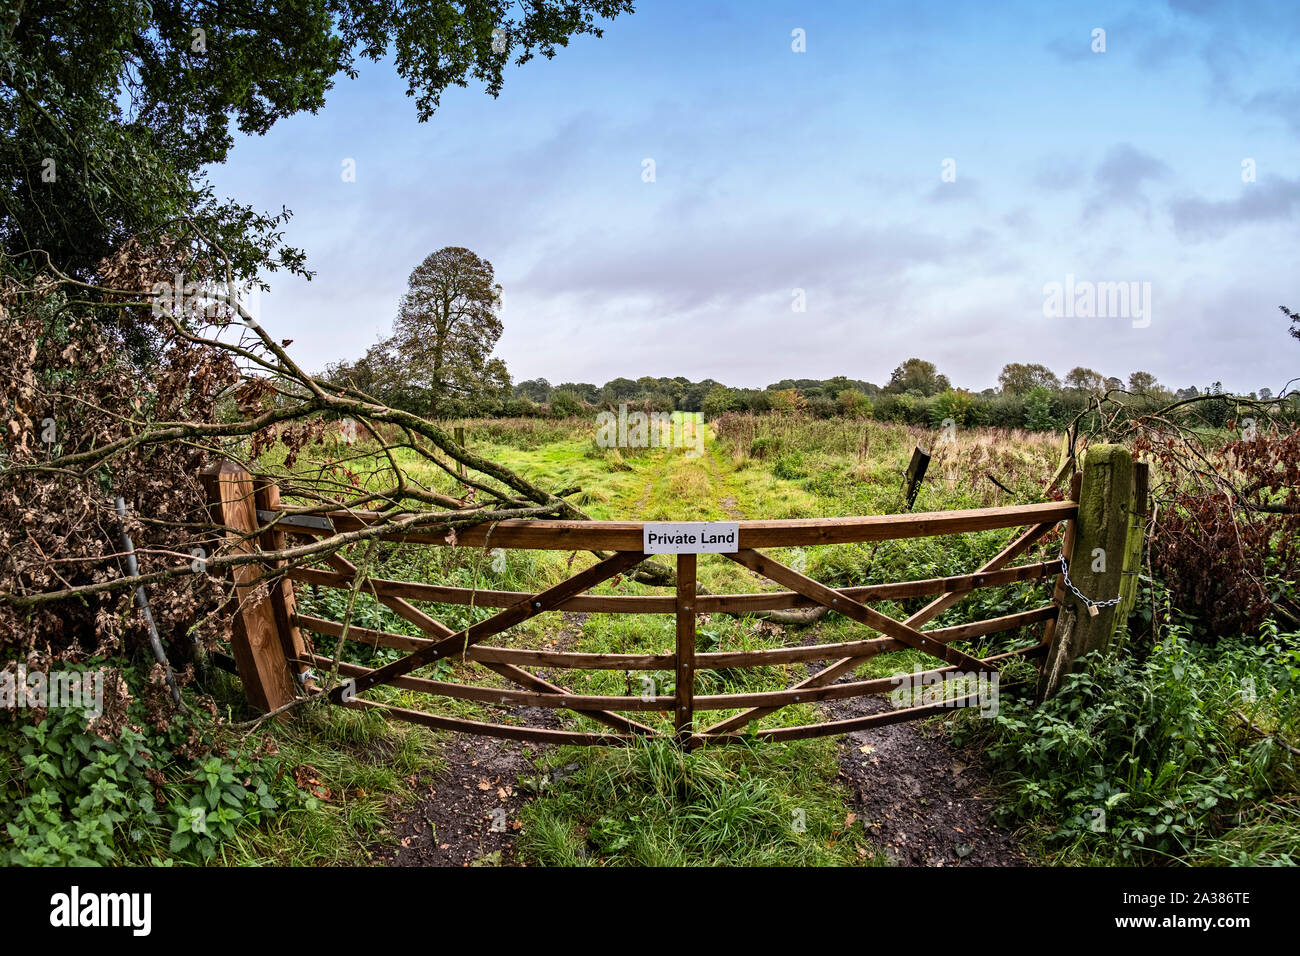 View over gate into private land with warning sign in Cheshire UK Stock Photo